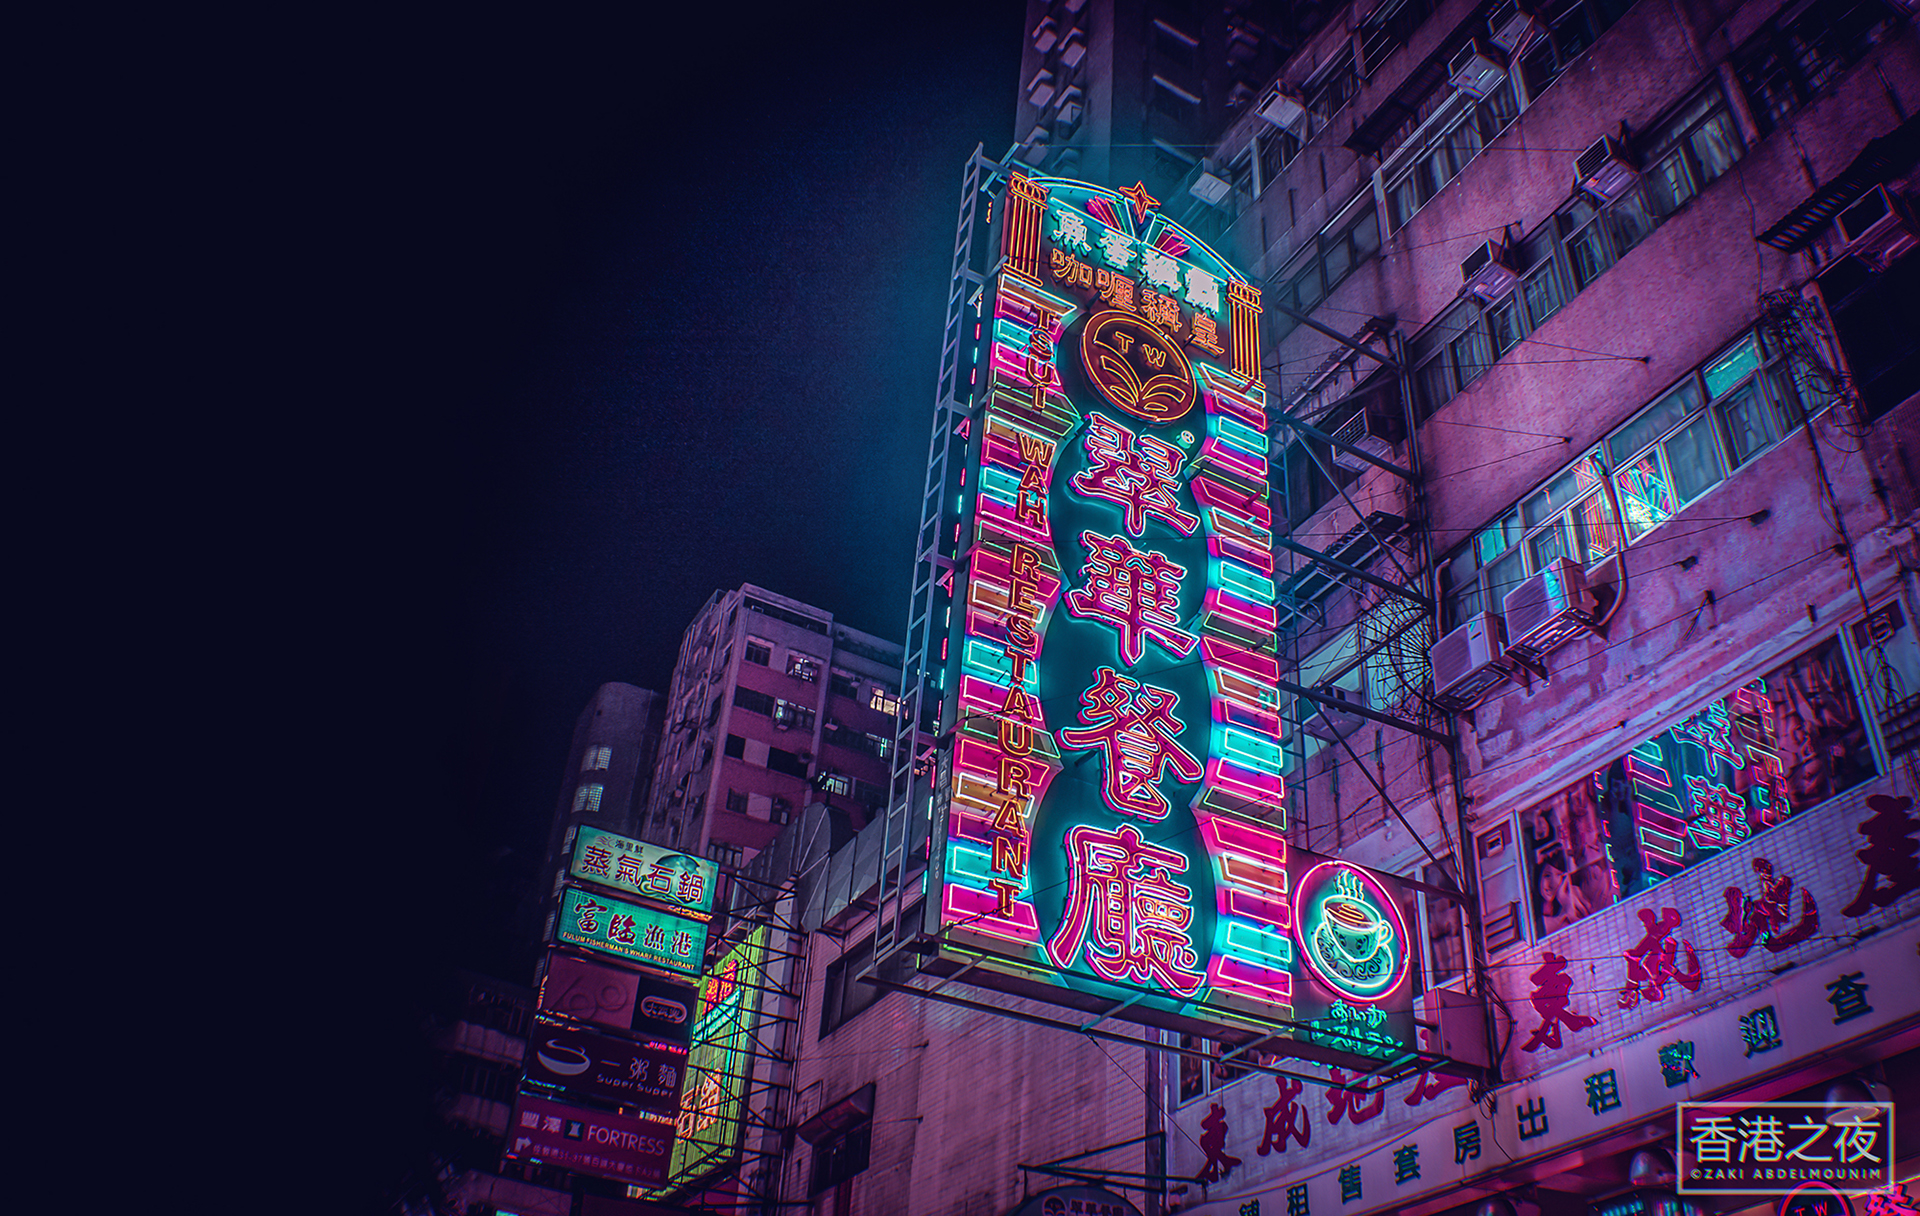 How Hong Kong S Fading Neon Lights May Change The Way Photographers Capture The City